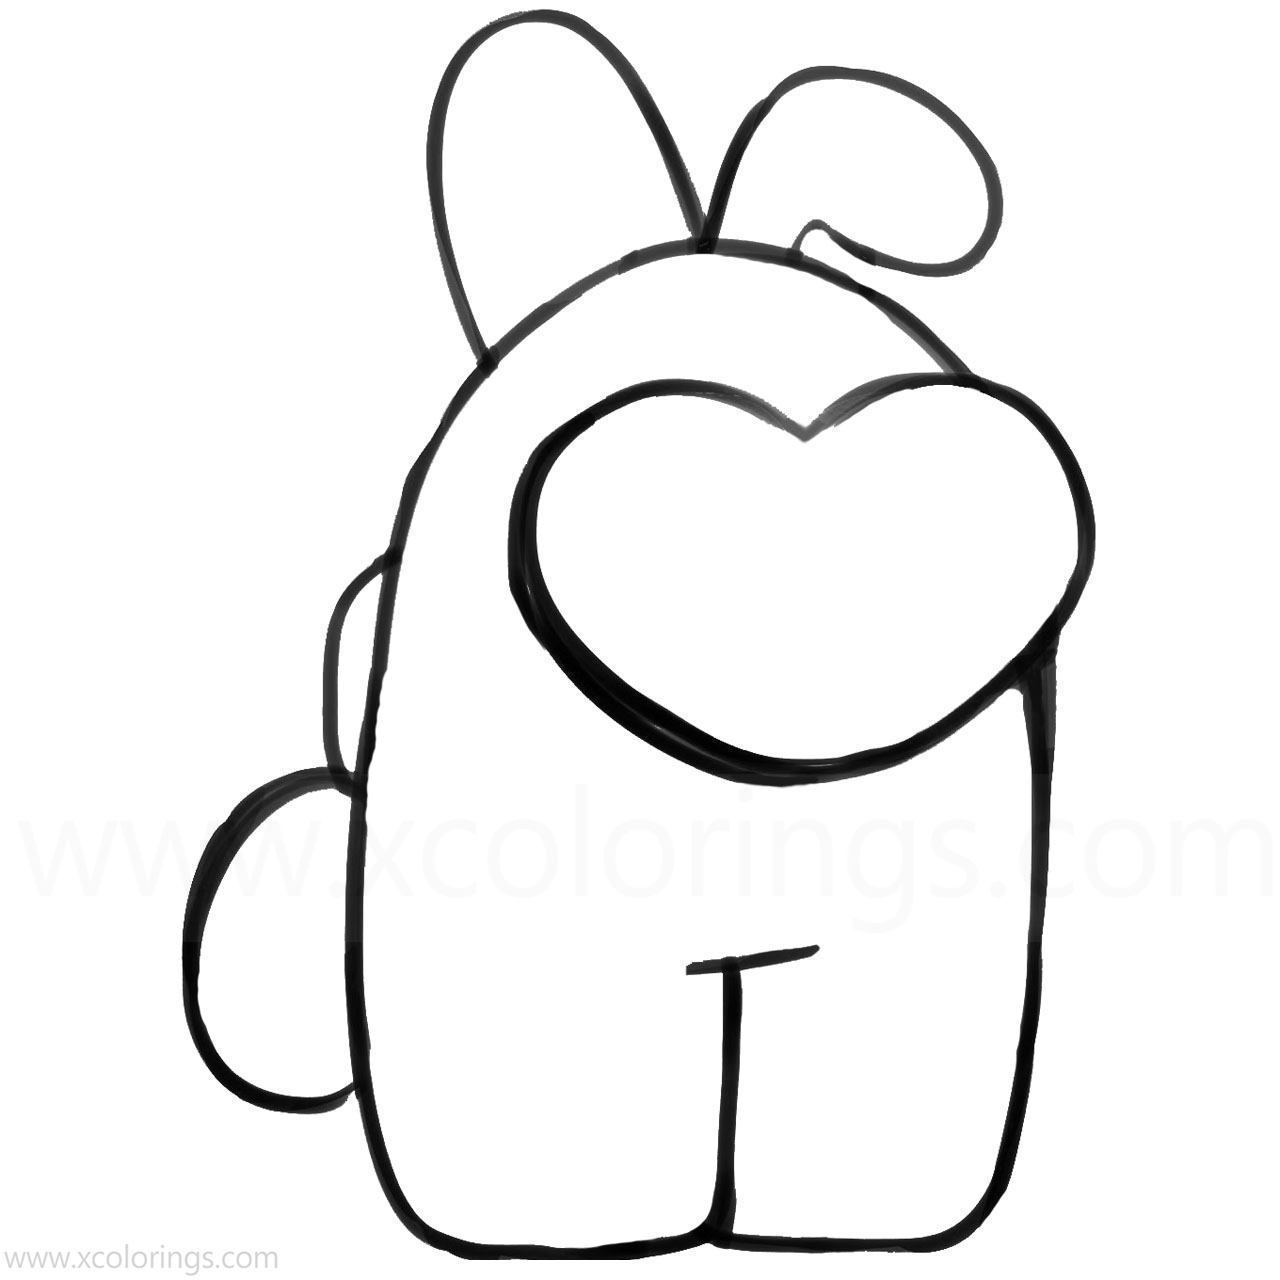 Free Among Us Coloring Pages Rabbit Skin printable